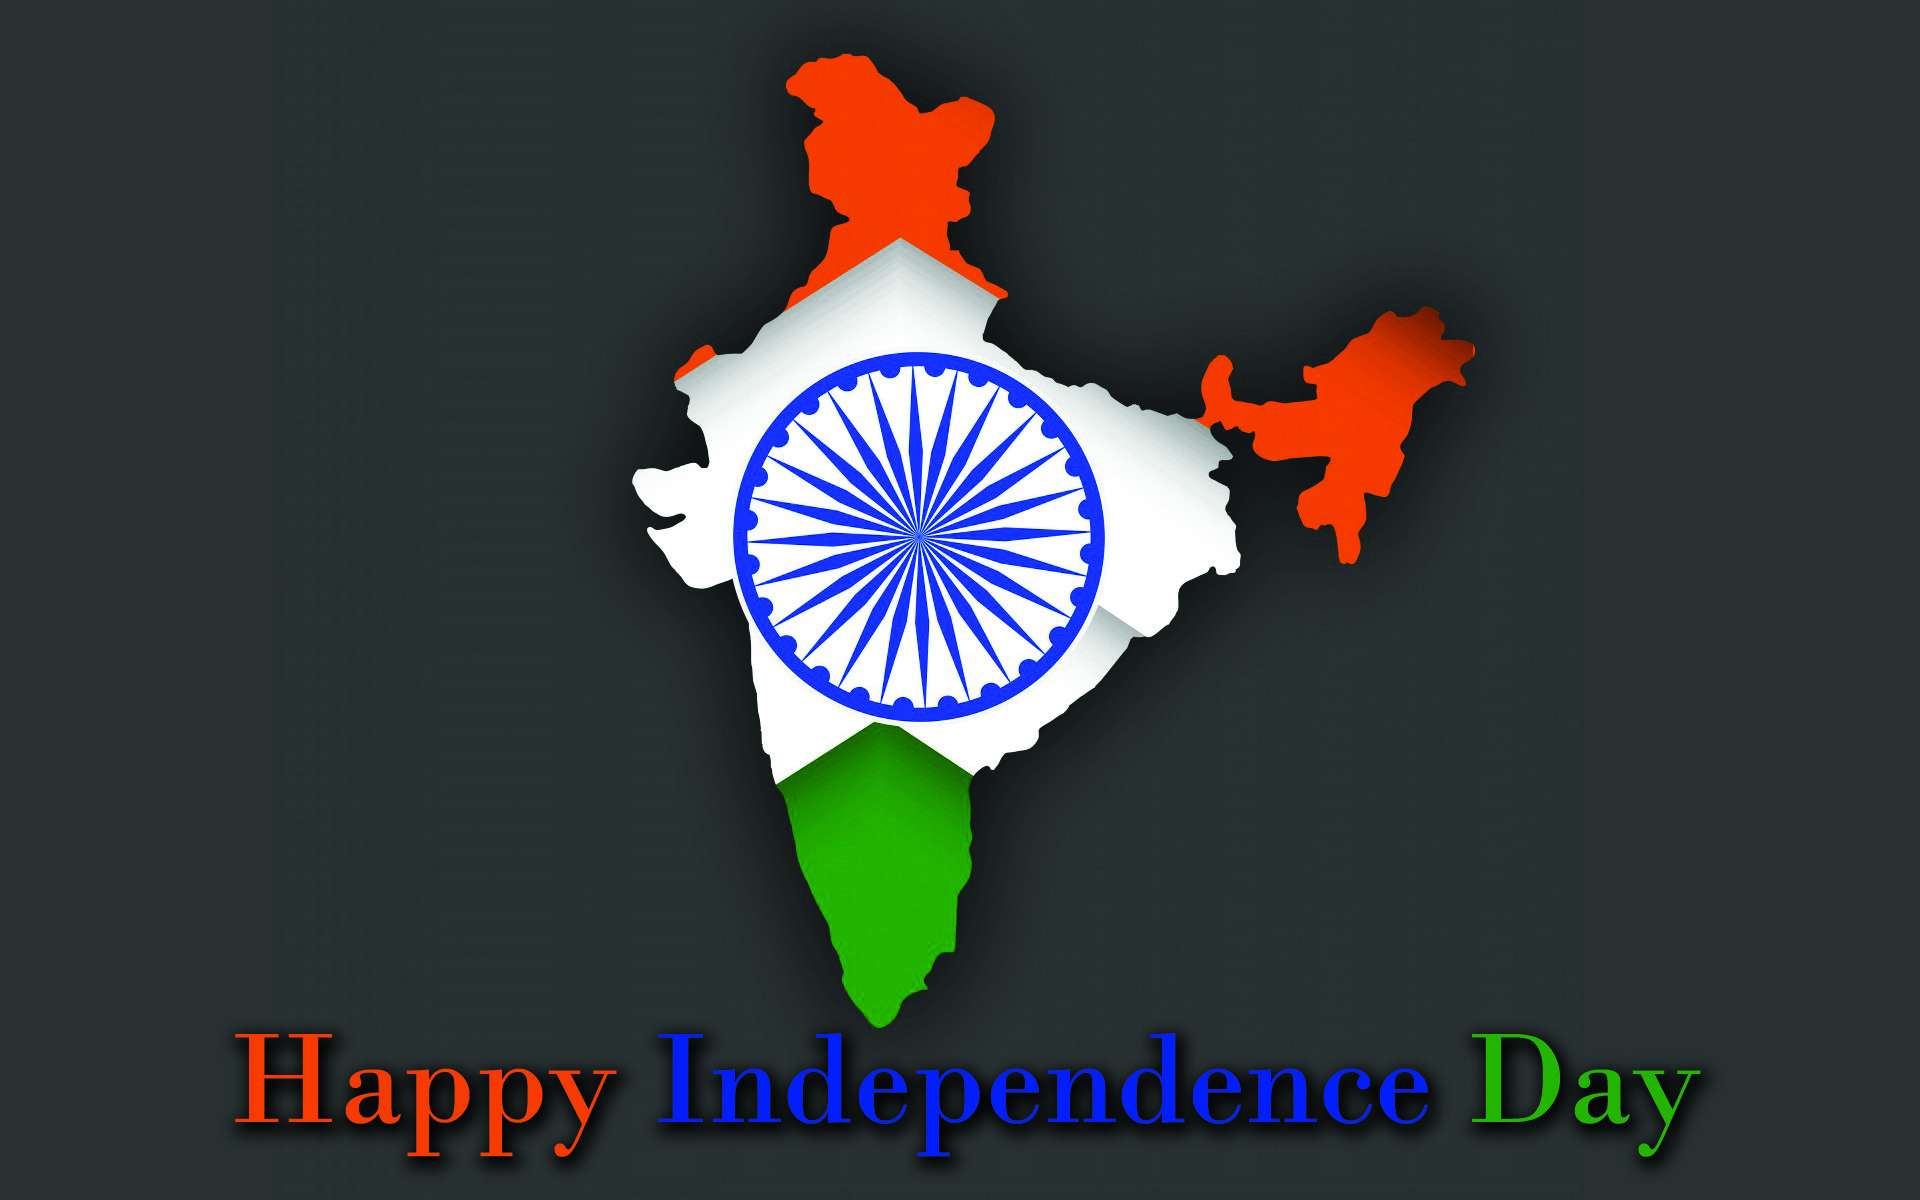 1920x1200 happy independence day greetings hd wallpapers | Free wallpapers